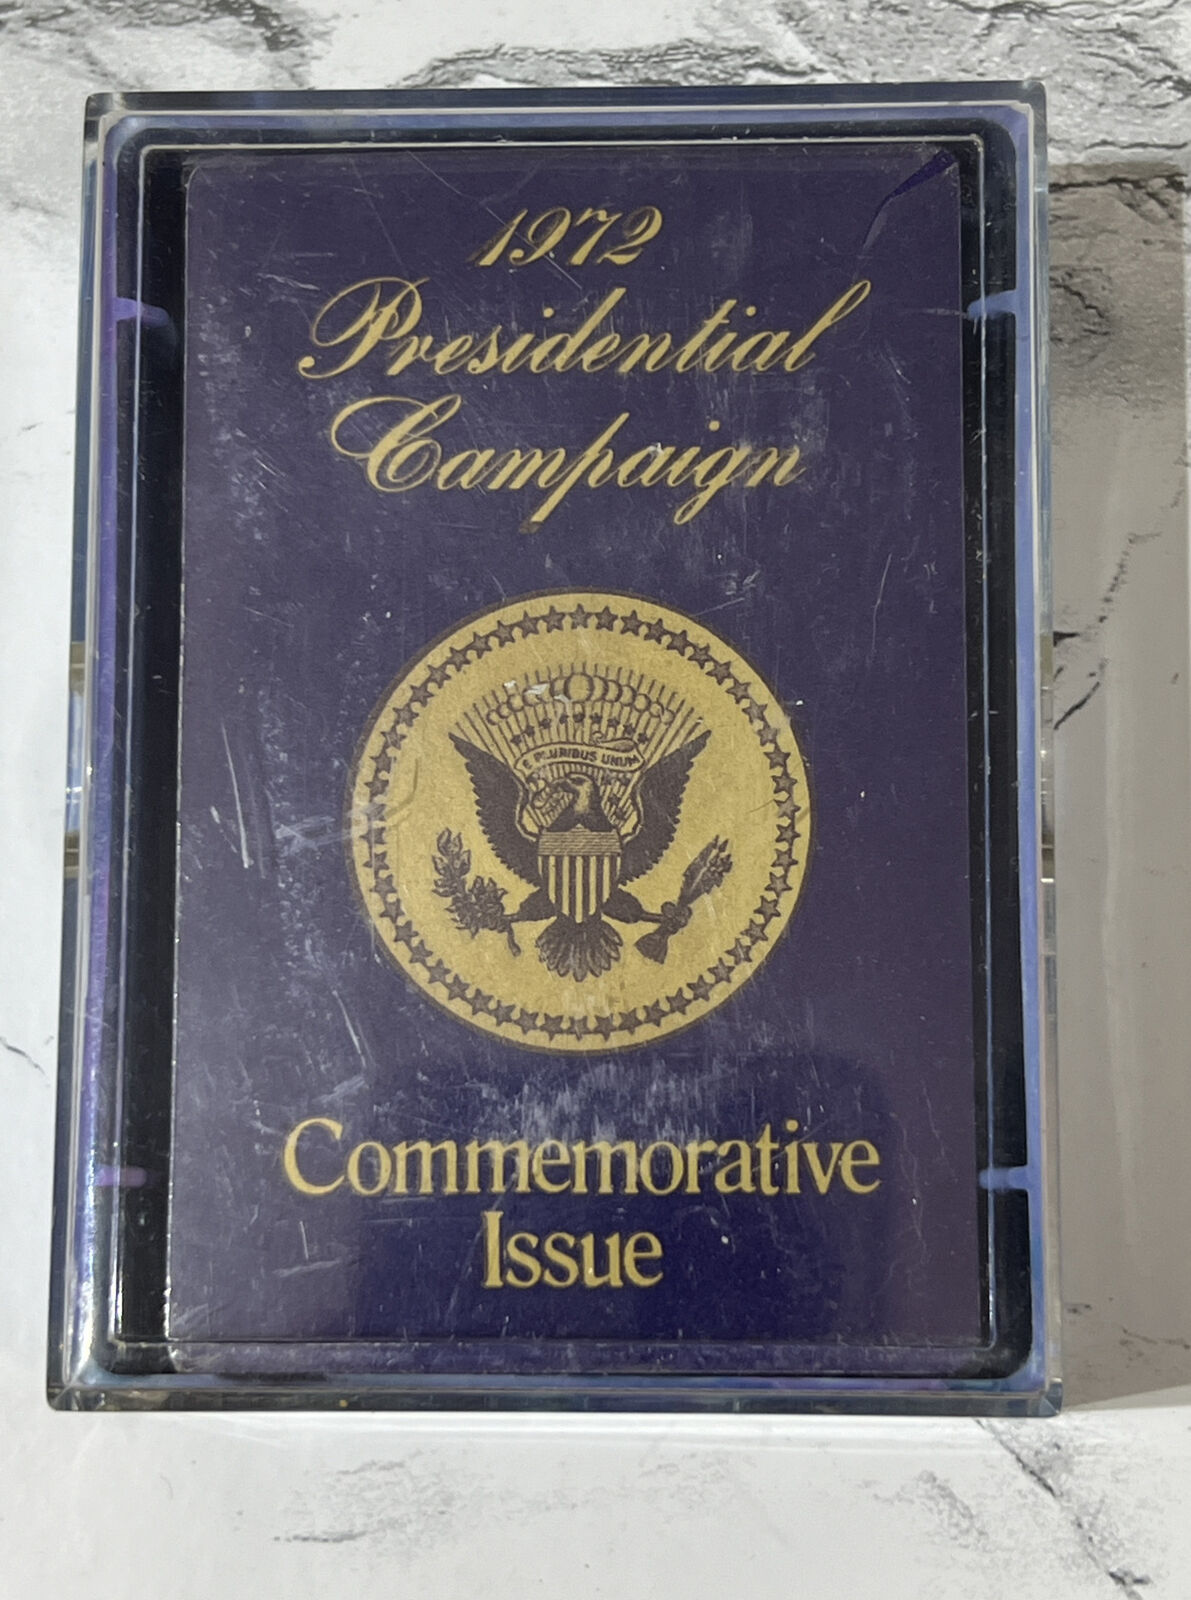 RARE 1972 Presidential Campaign Commemorative Issue Playing Cards McGovern